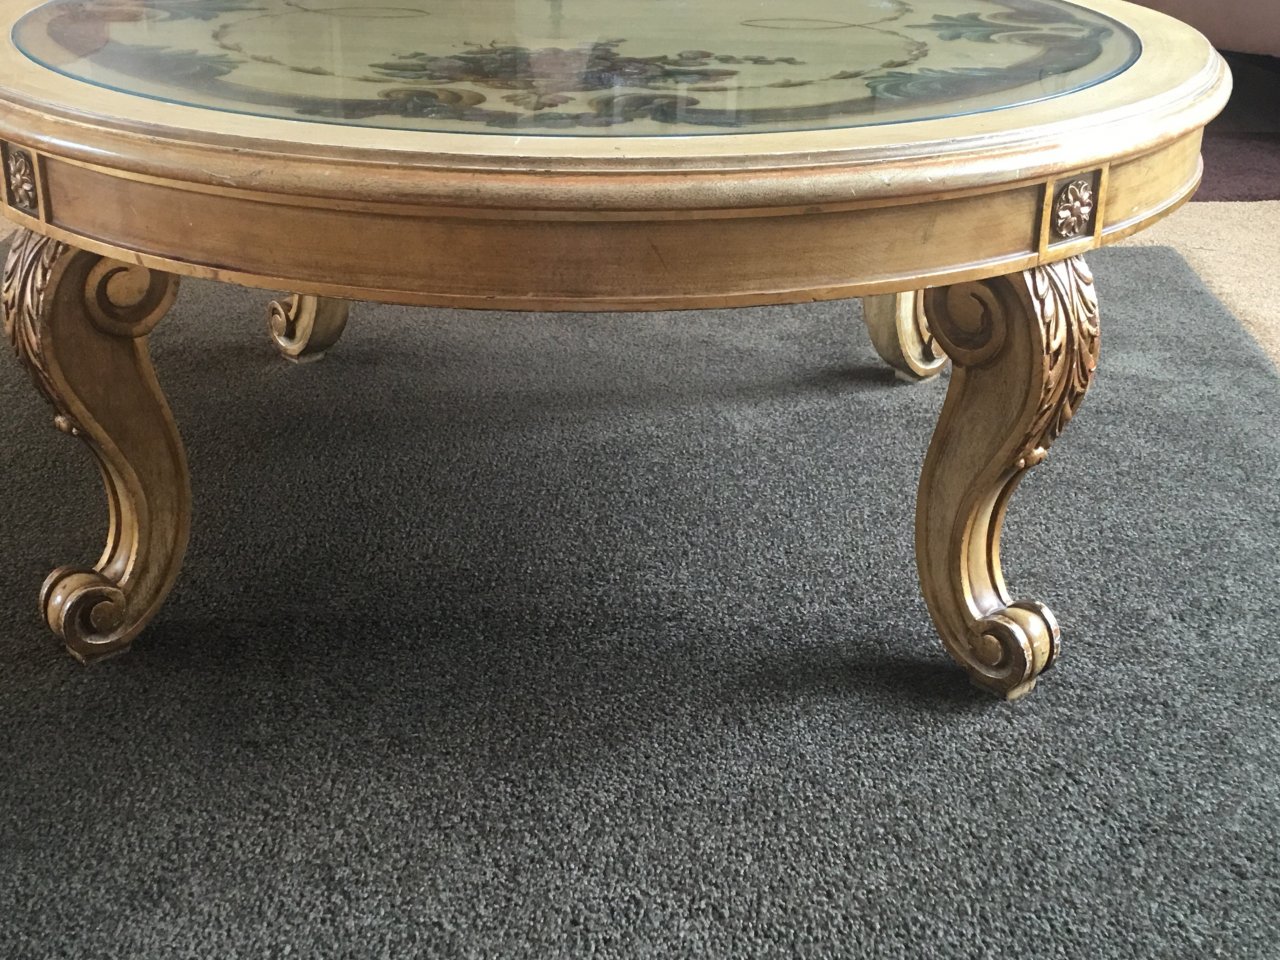 34+ distressed wood round coffee table Vince metal table clad coffee furniture potterybarn pottery barn subtle throwback 1950s adds faceted dimension accent tables gleam brass productfind